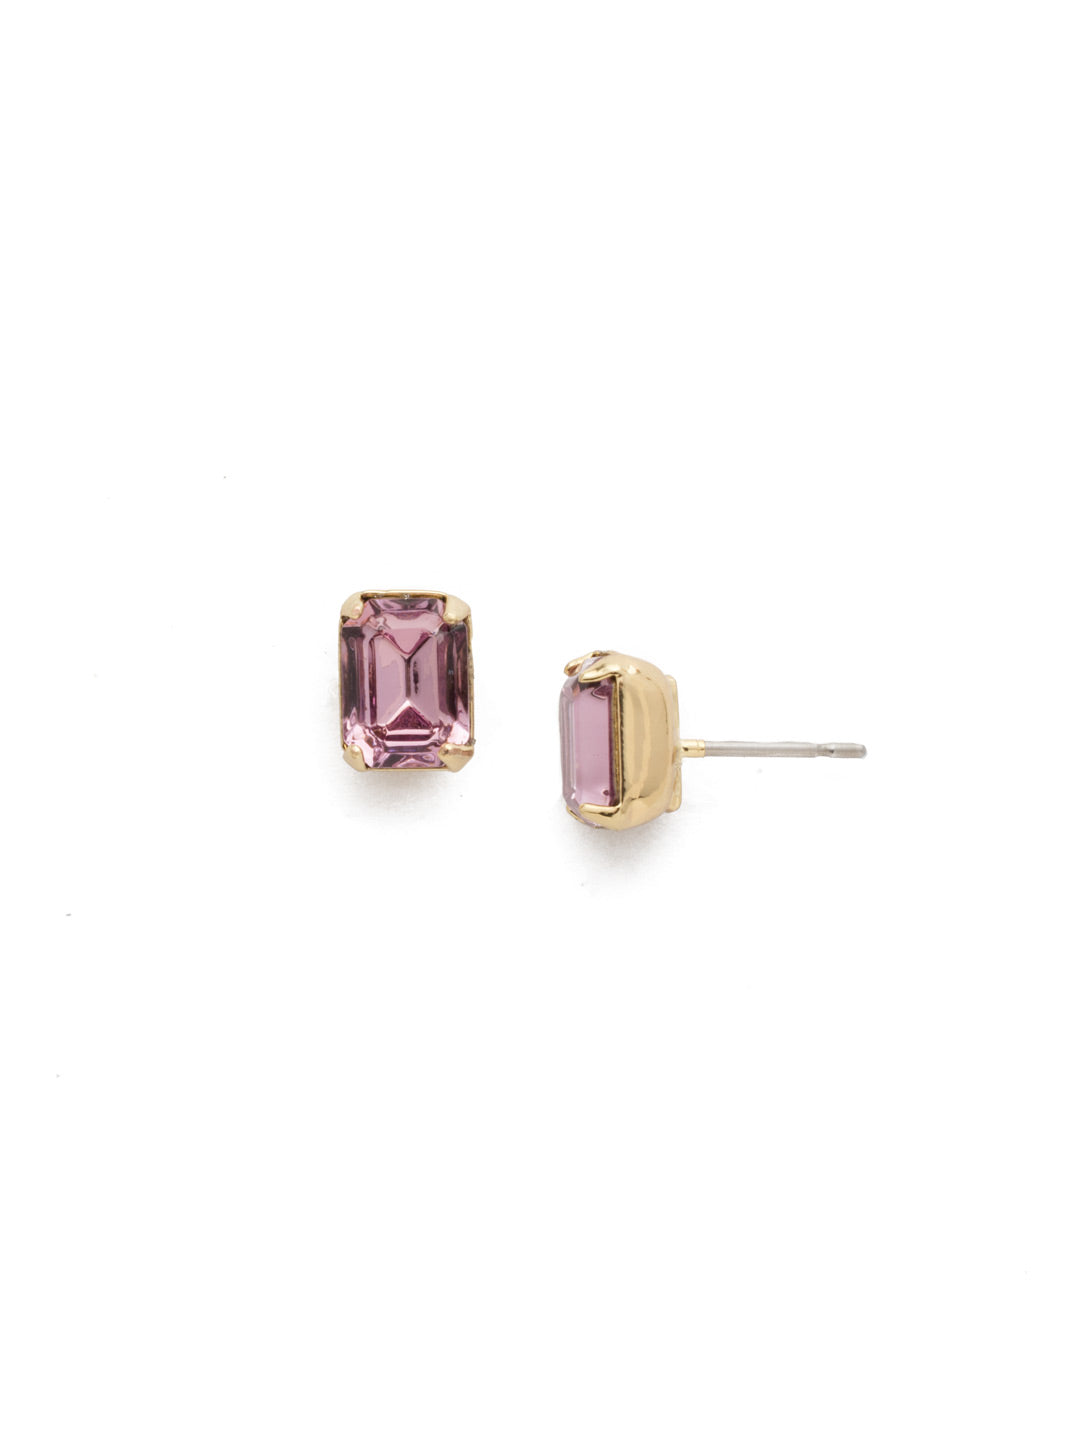 Mini Emerald Cut Stud Earrings - EBY42BGCPO - Simply sophisticated. The mini emerald cut stud earrings can be worn alone or paired with anything for an extra accent to any wardrobe. From Sorrelli's Candy Pop collection in our Bright Gold-tone finish.